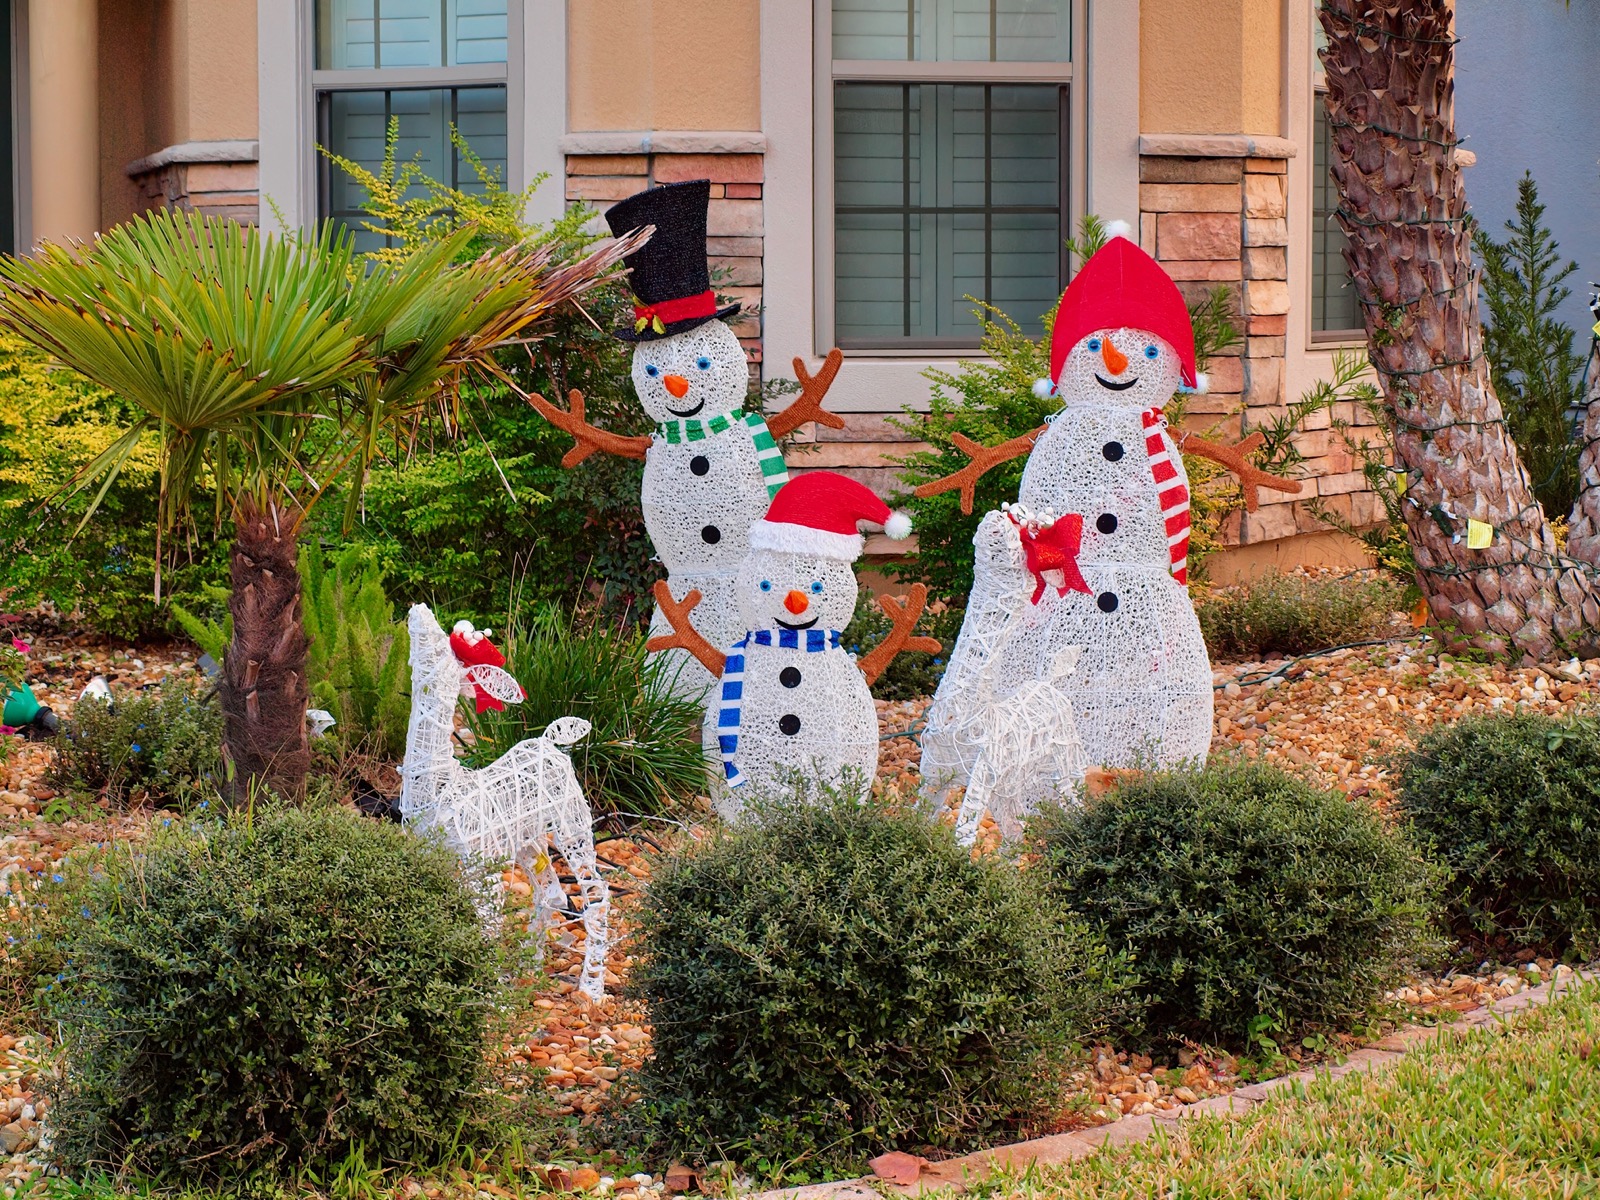 Three white plastic snow people and two white plastic reindeer in winter attire.